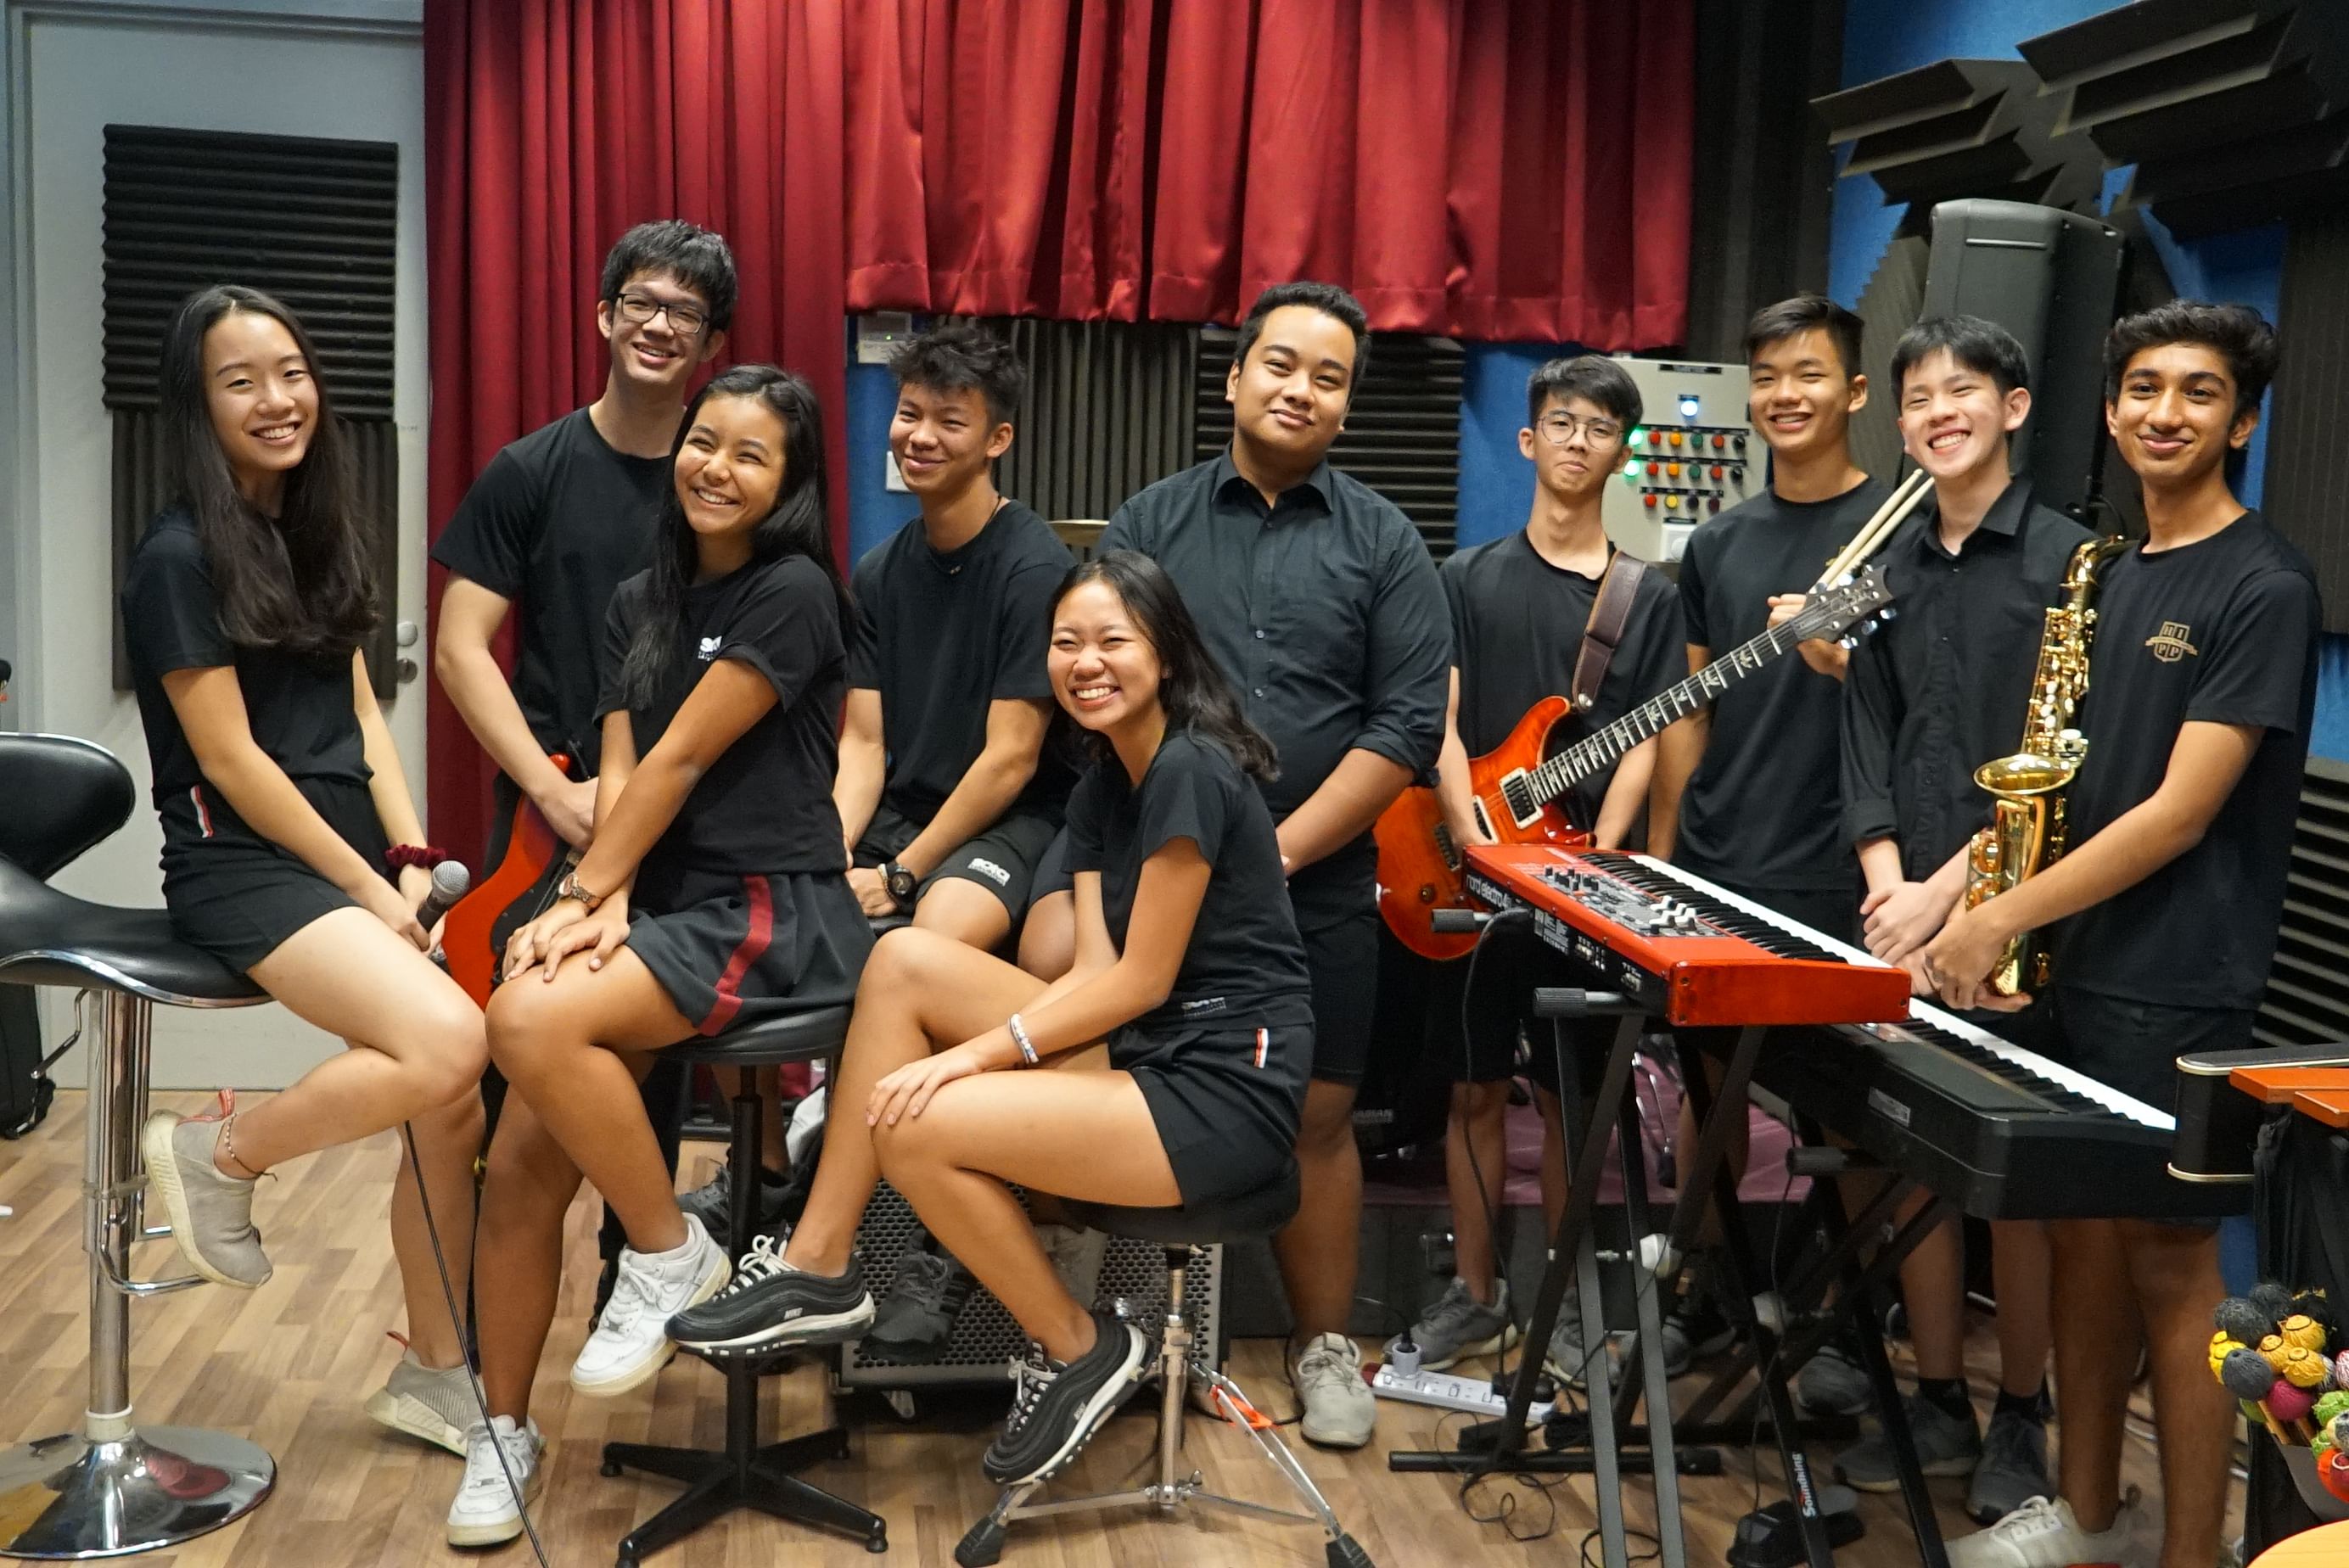  SOTA's student band Pugs in Pockets